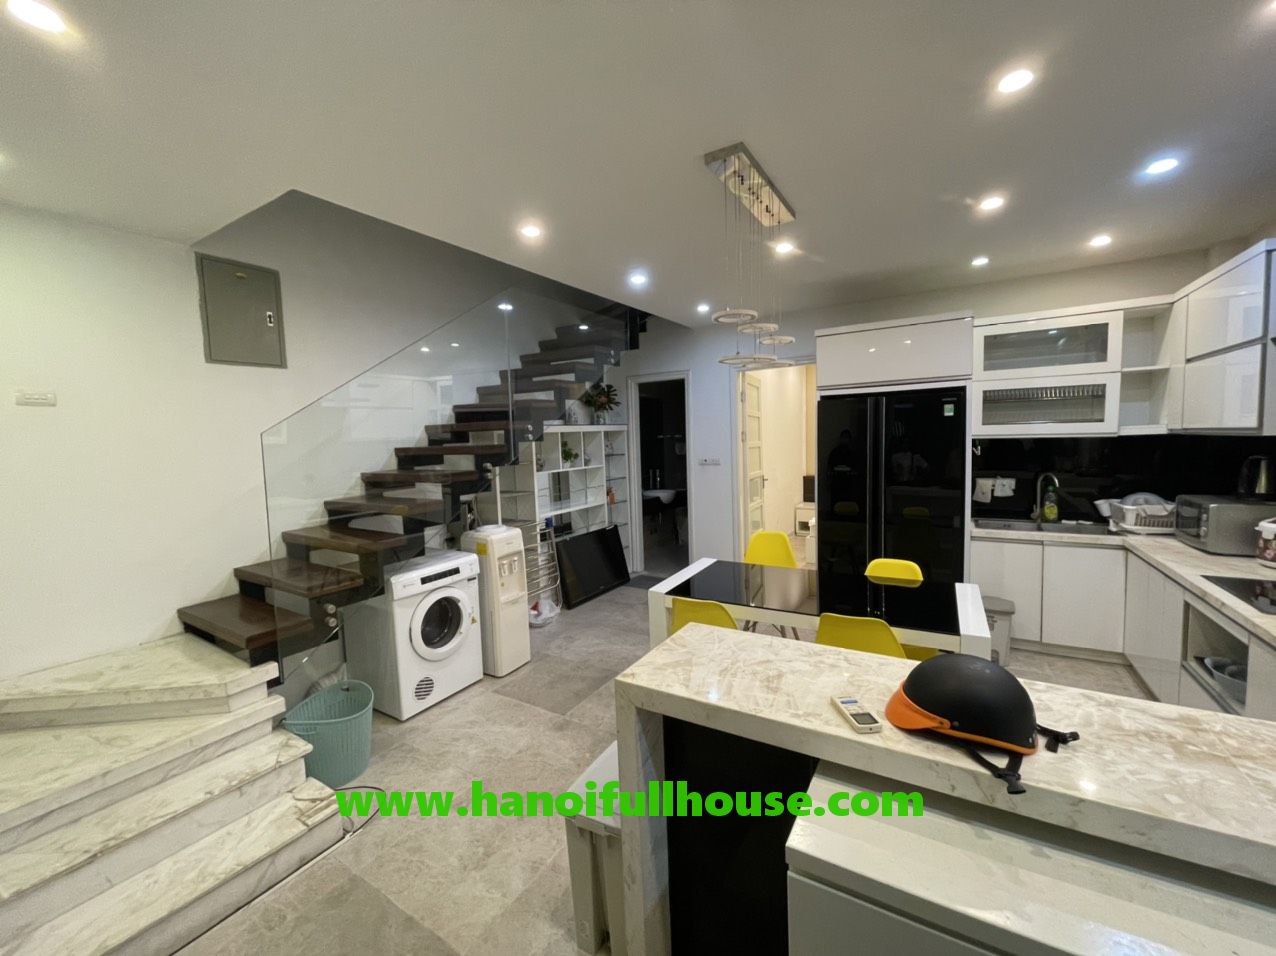 Spacious & modern 3-BR duplex apartment in the heart of Tay Ho district